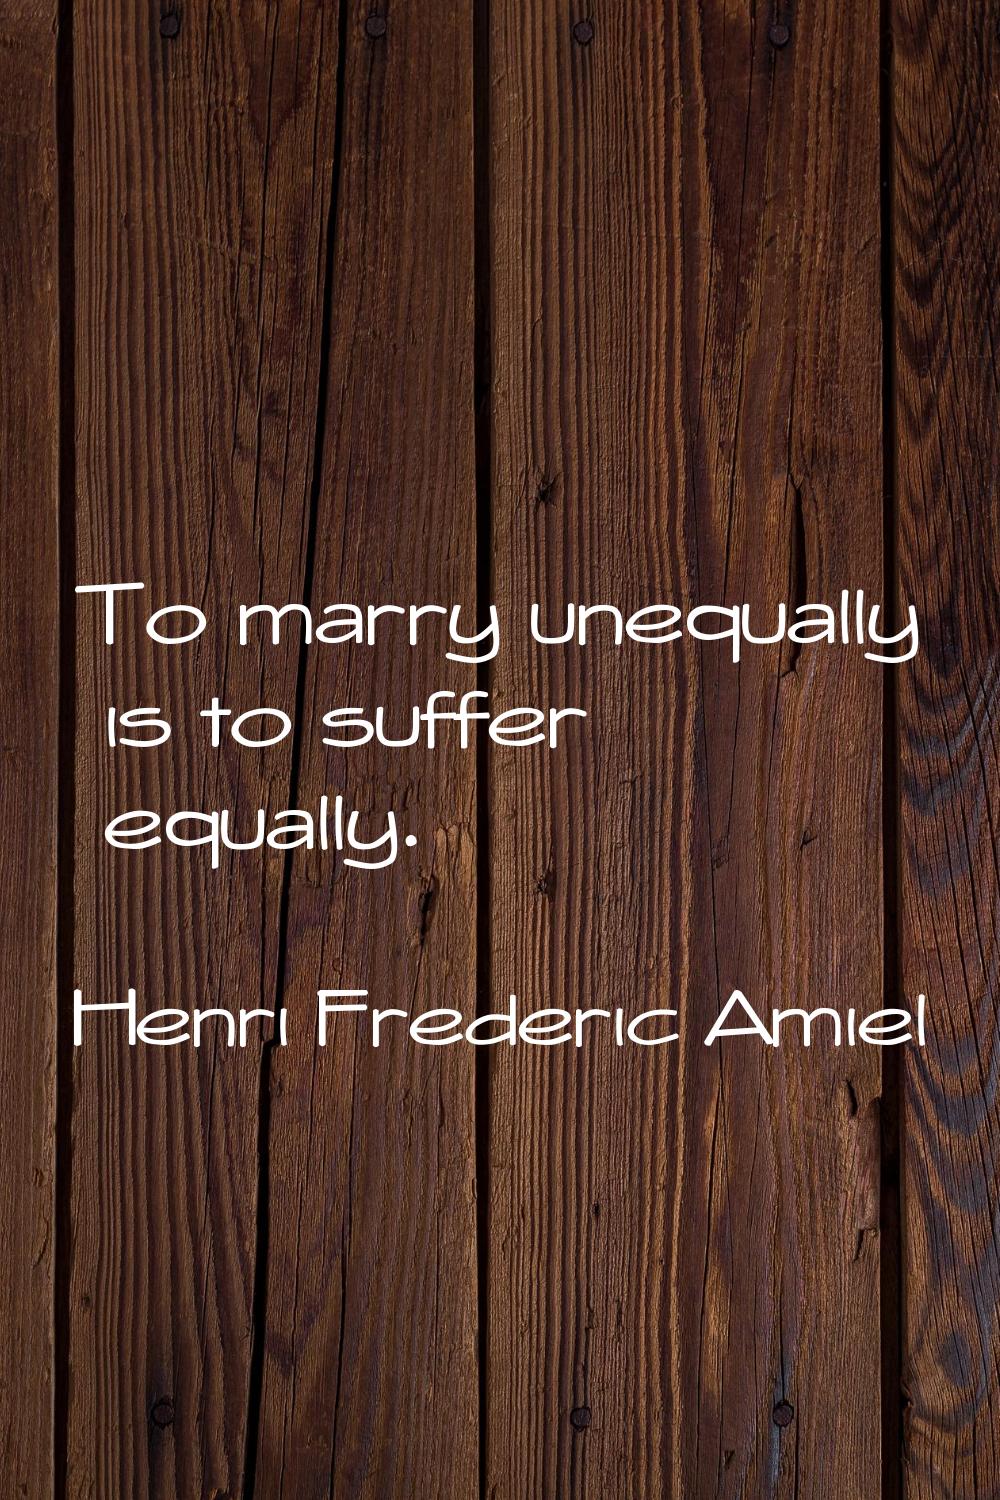 To marry unequally is to suffer equally.